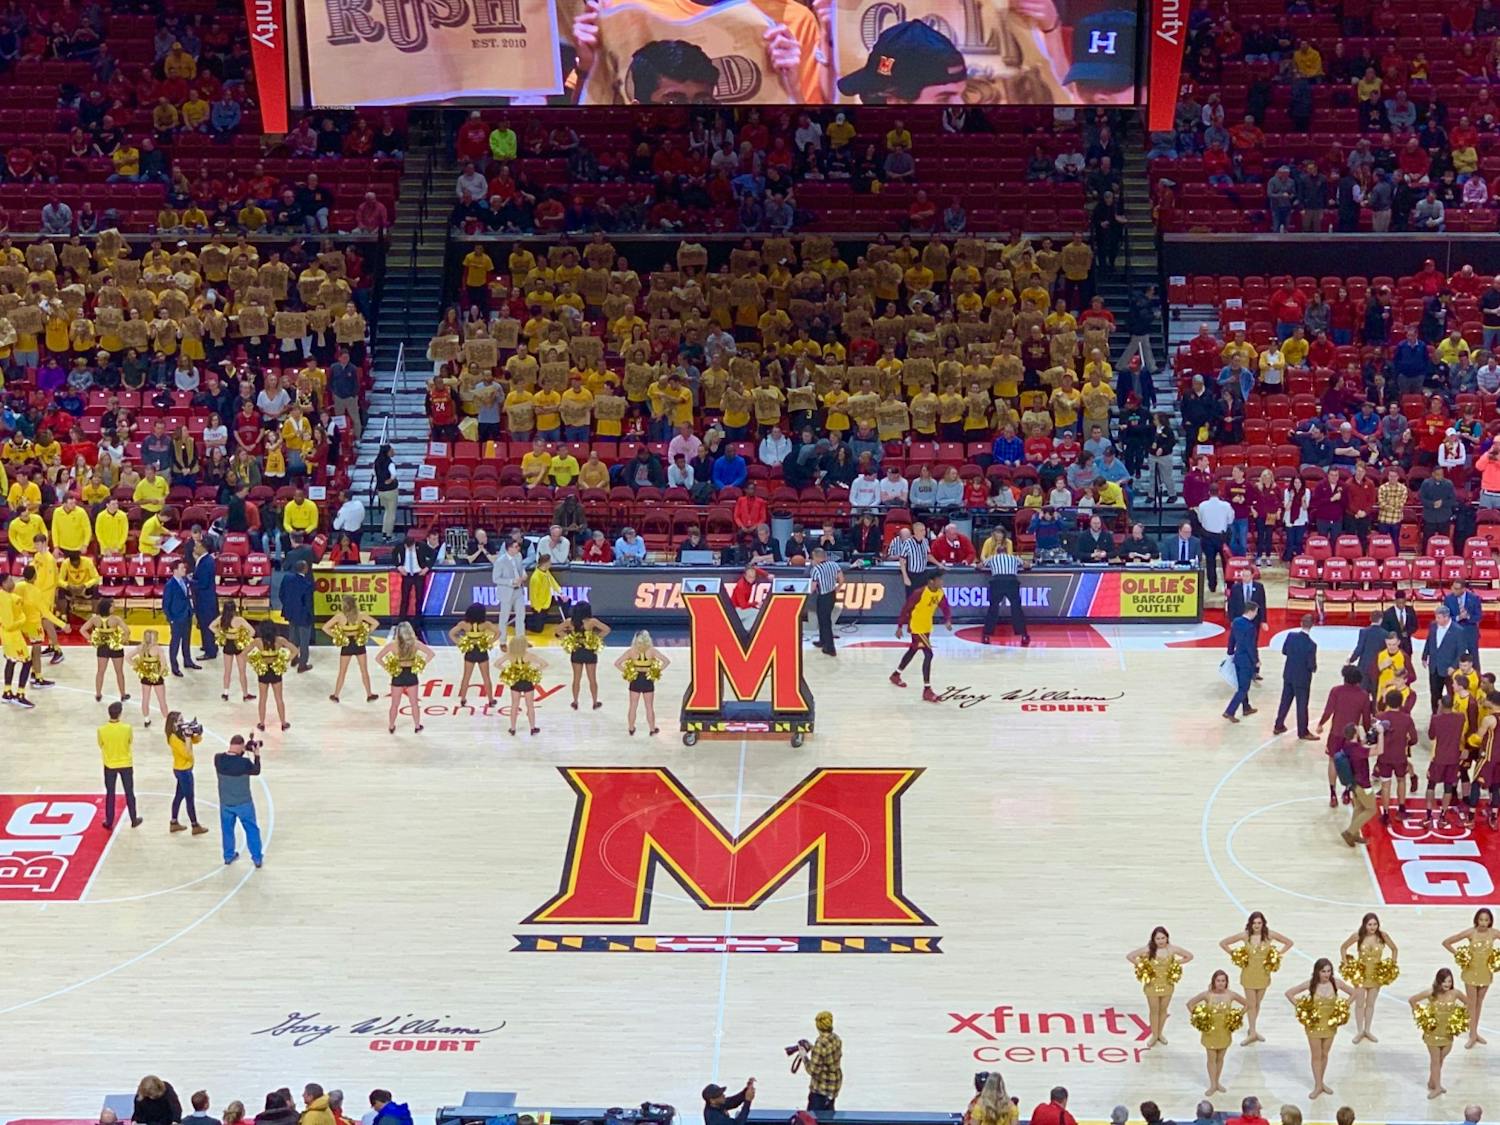 Photo of the Xfinity Center, the home basketball court of the University of Maryland.